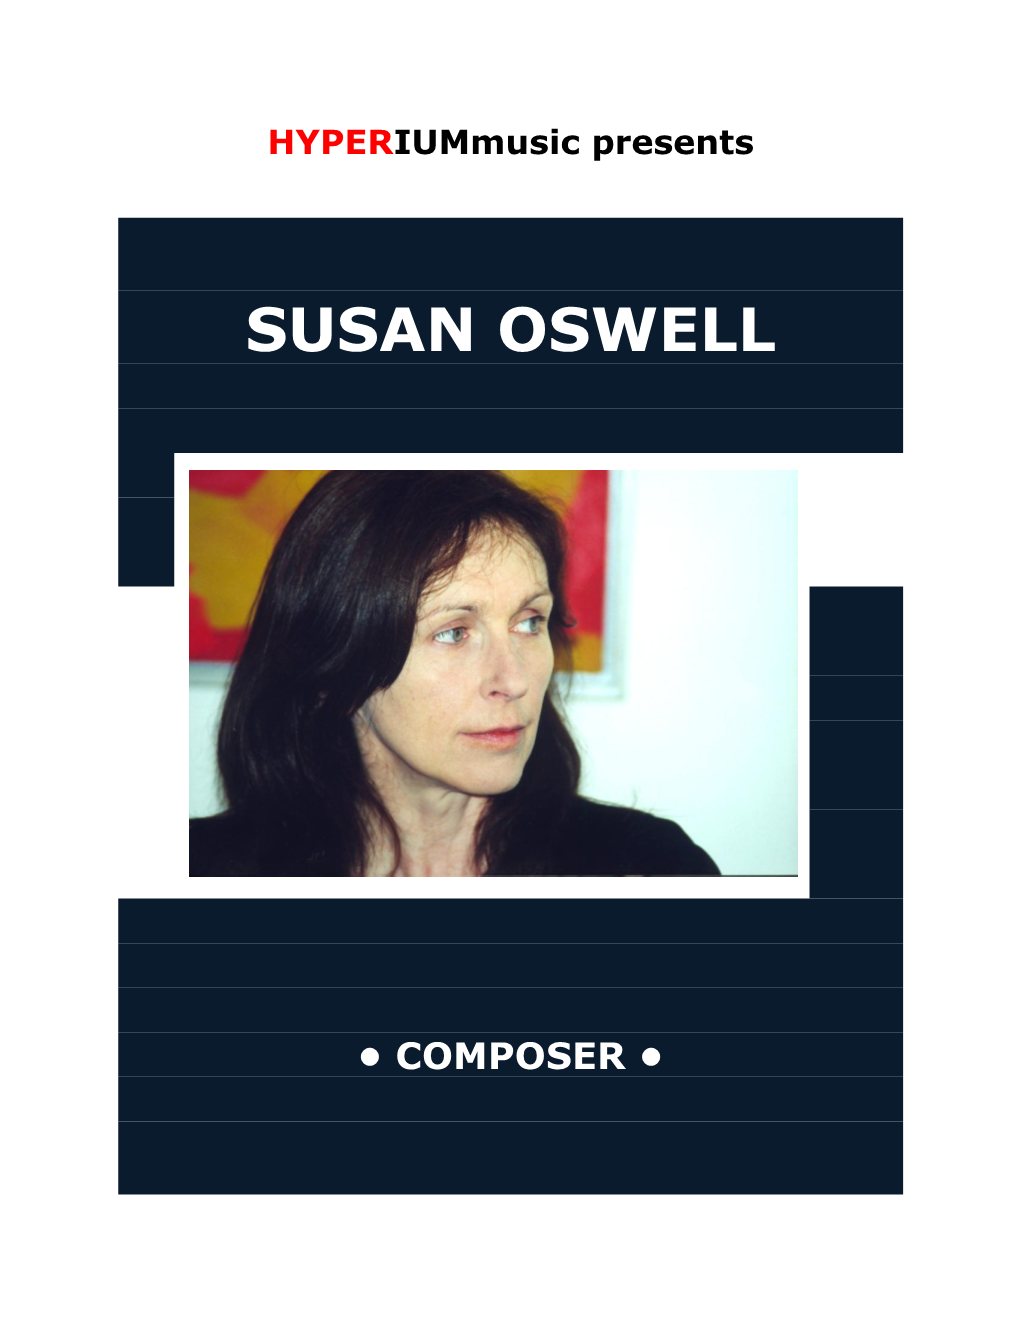 Susan Oswell